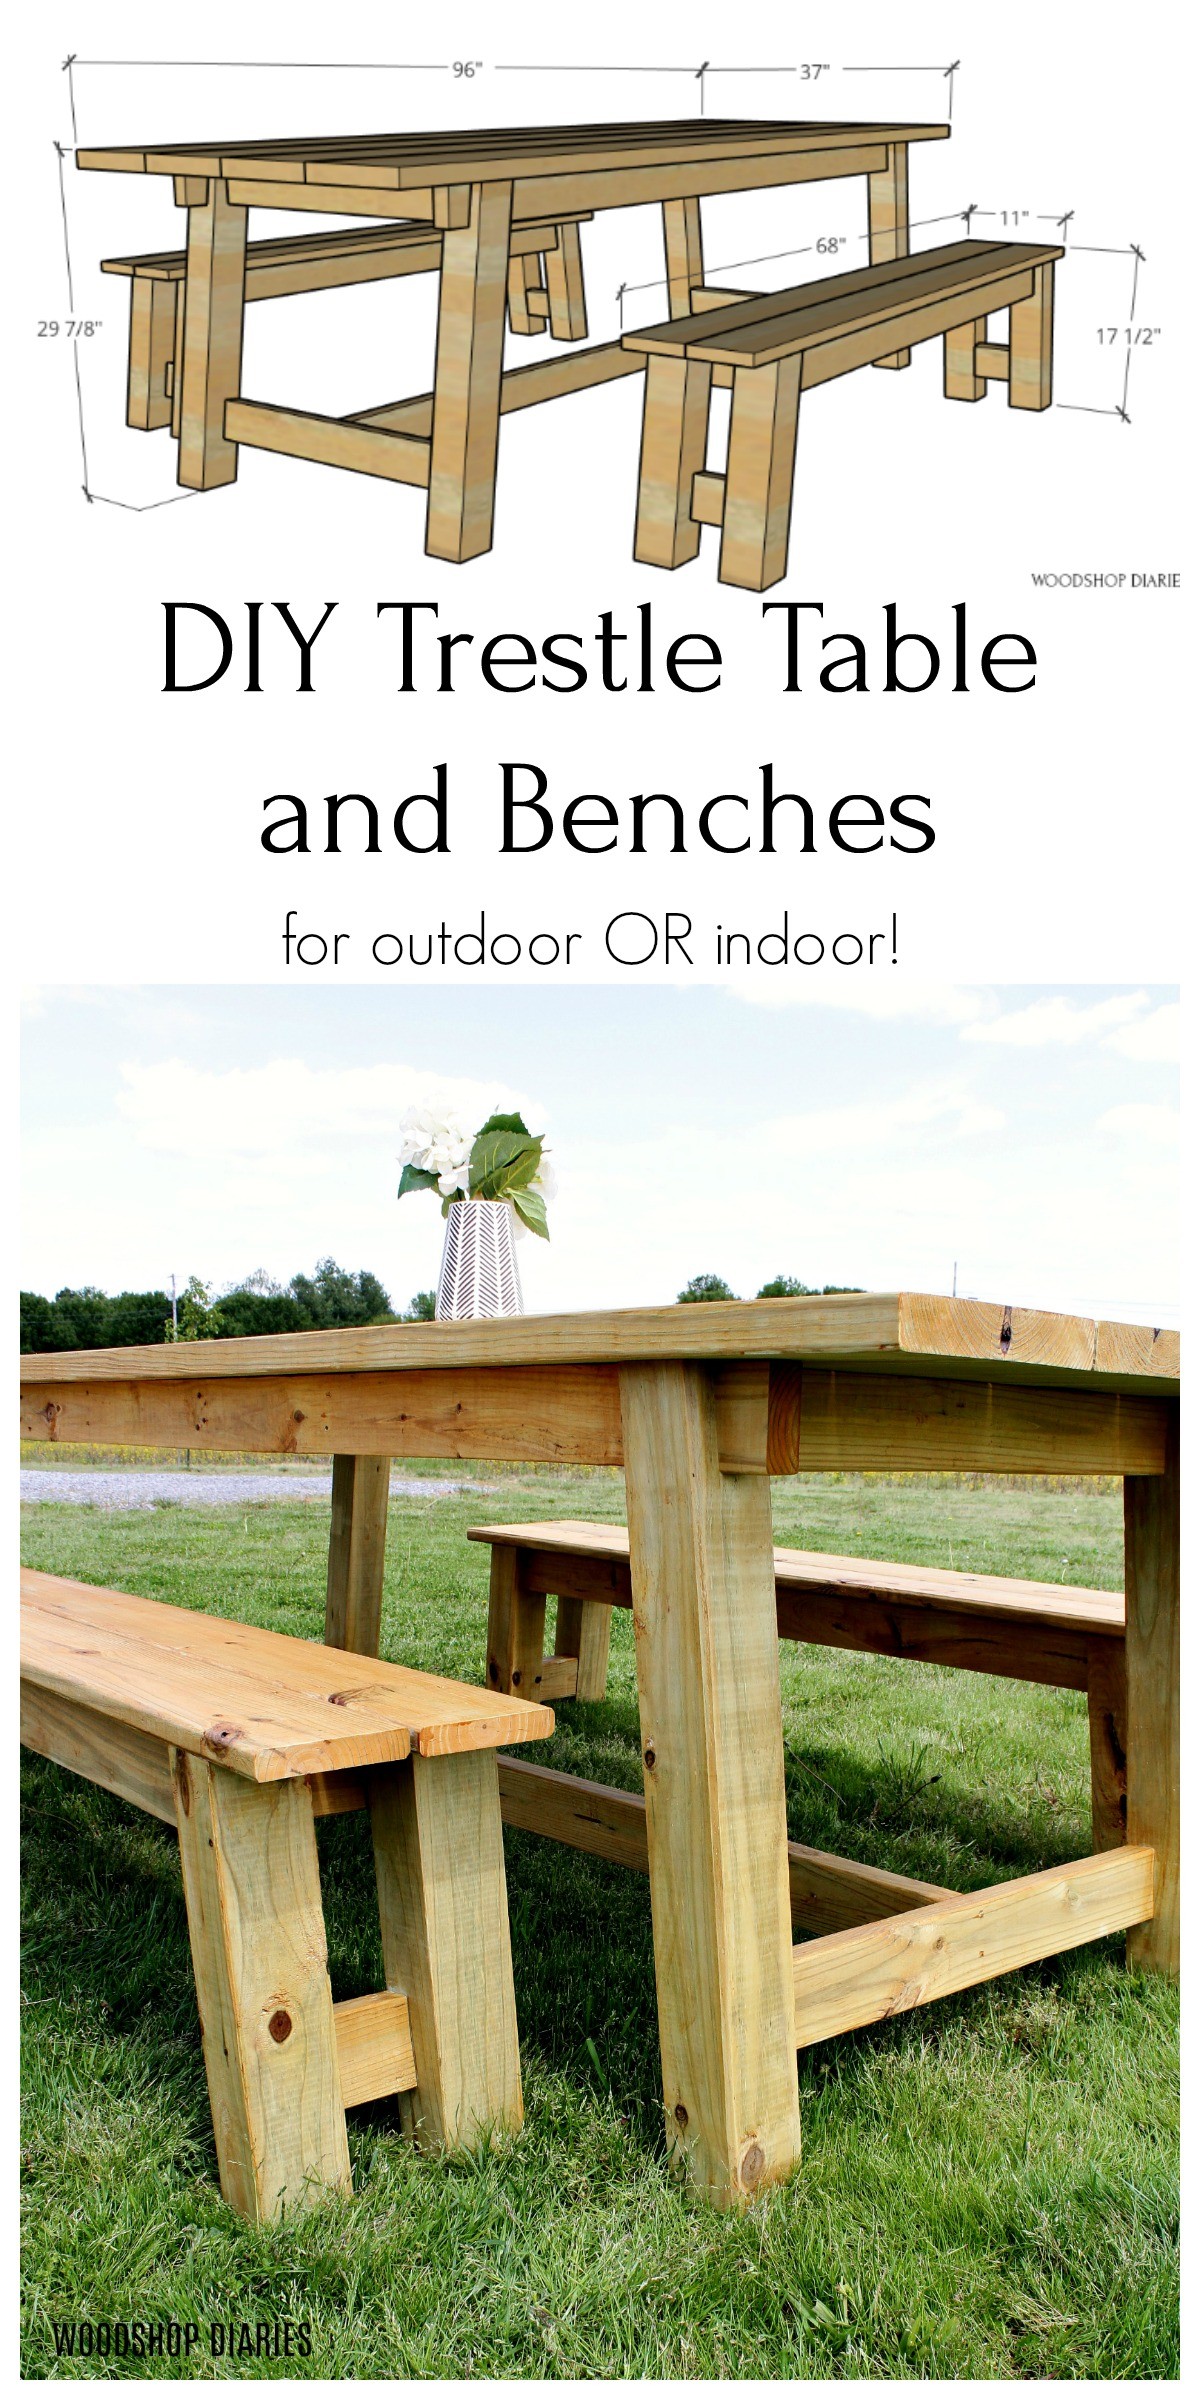 DIY Trestle table and bench 3D diagram and close up pinterest graphic collage